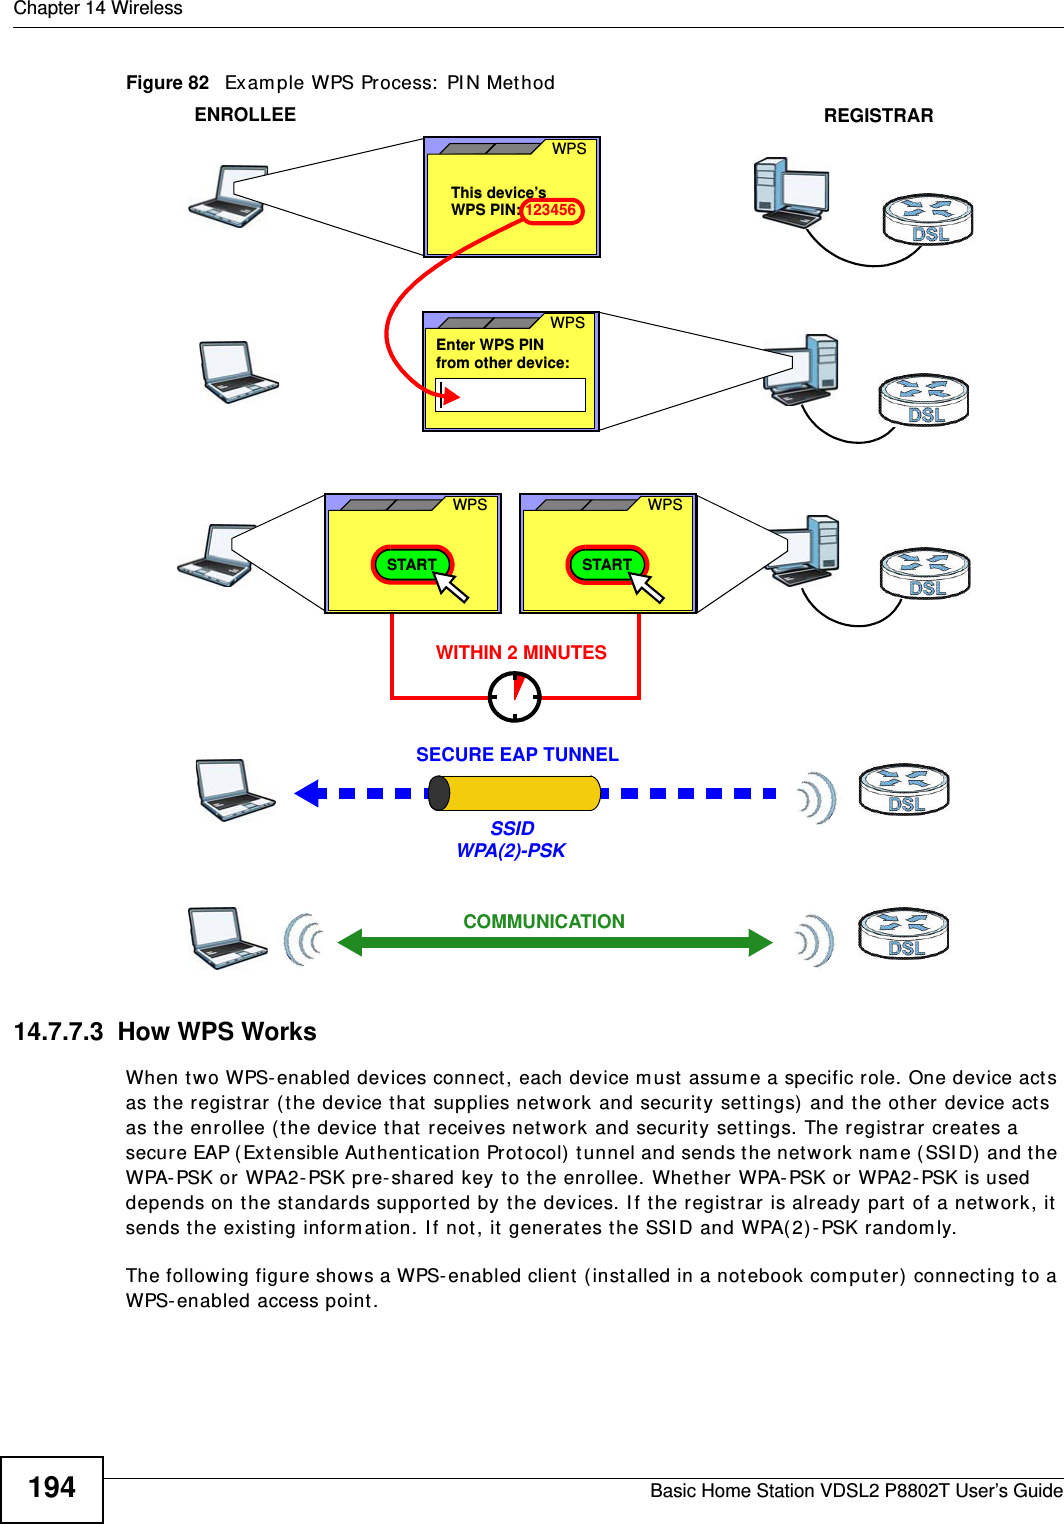 Chapter 14 WirelessBasic Home Station VDSL2 P8802T User’s Guide194Figure 82   Exam ple WPS Process:  PI N Met hod14.7.7.3  How WPS WorksWhen t wo WPS- enabled devices connect , each device m ust  assum e a specific role. One device acts as t he regist rar ( t he device t hat  supplies net work and security set t ings)  and the other device acts as the enrollee ( the device t hat receives net work and security set t ings. The regist rar creates a secure EAP ( Extensible Aut hent ication Protocol) tunnel and sends t he net work nam e ( SSI D) and the WPA-PSK or WPA2- PSK pre- shared key t o t he enrollee. Whet her WPA- PSK or  WPA2- PSK is used depends on t he st andards supported by the devices. I f t he regist rar is already part  of a network, it sends t he exist ing inform at ion. I f not, it generates t he SSI D and WPA( 2) - PSK random ly.The following figure shows a WPS- enabled client ( inst alled in a not ebook com puter)  connect ing to a WPS- enabled access point.ENROLLEESECURE EAP TUNNELSSIDWPA(2)-PSKWITHIN 2 MINUTESCOMMUNICATIONThis device’s WPSEnter WPS PIN  WPSfrom other device: WPS PIN: 123456WPSSTARTWPSSTARTREGISTRAR